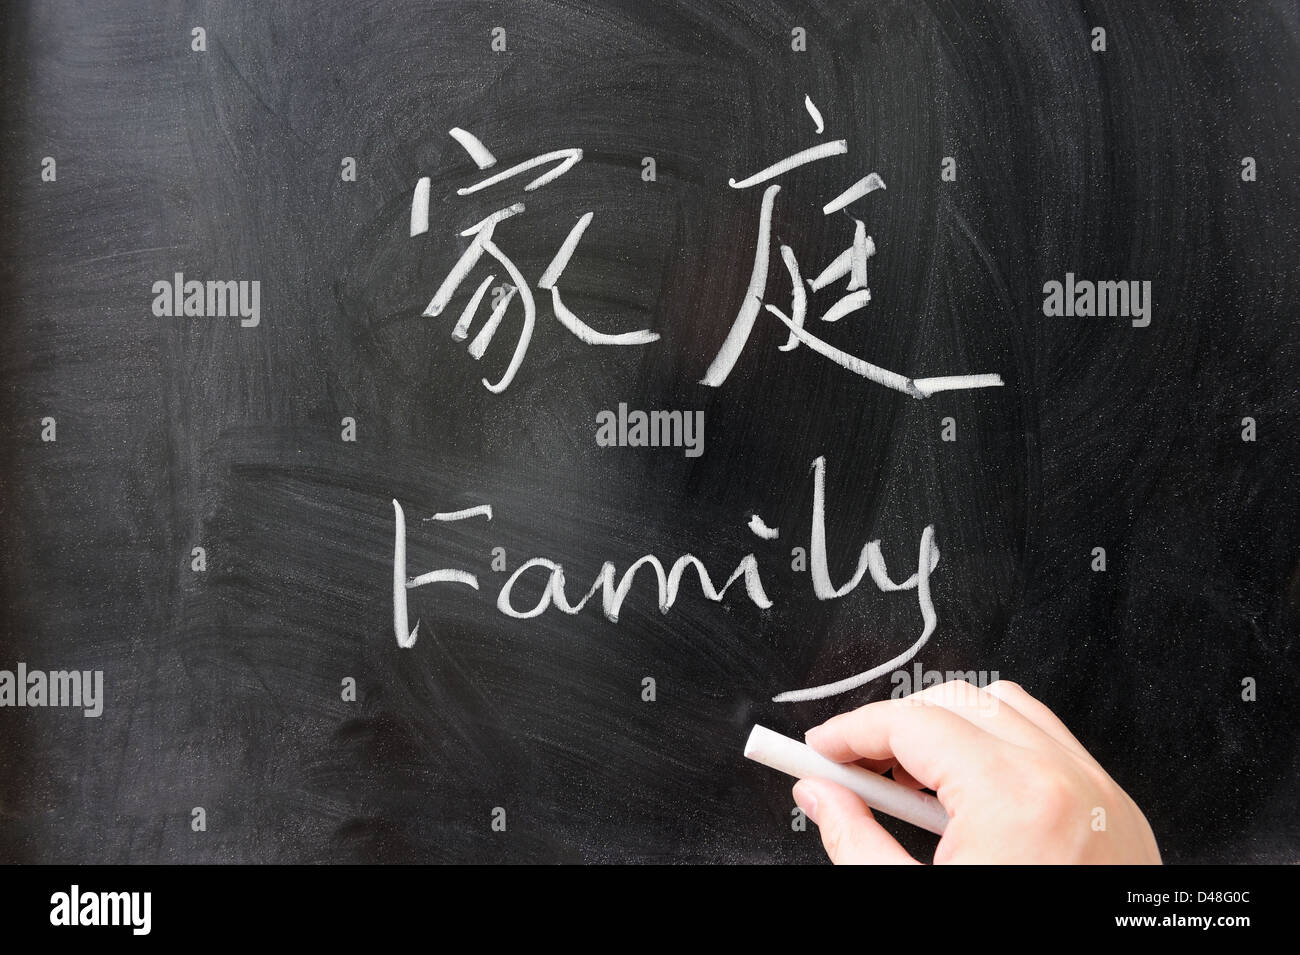 Family word in Chinese and English written on the chalkboard Stock Photo